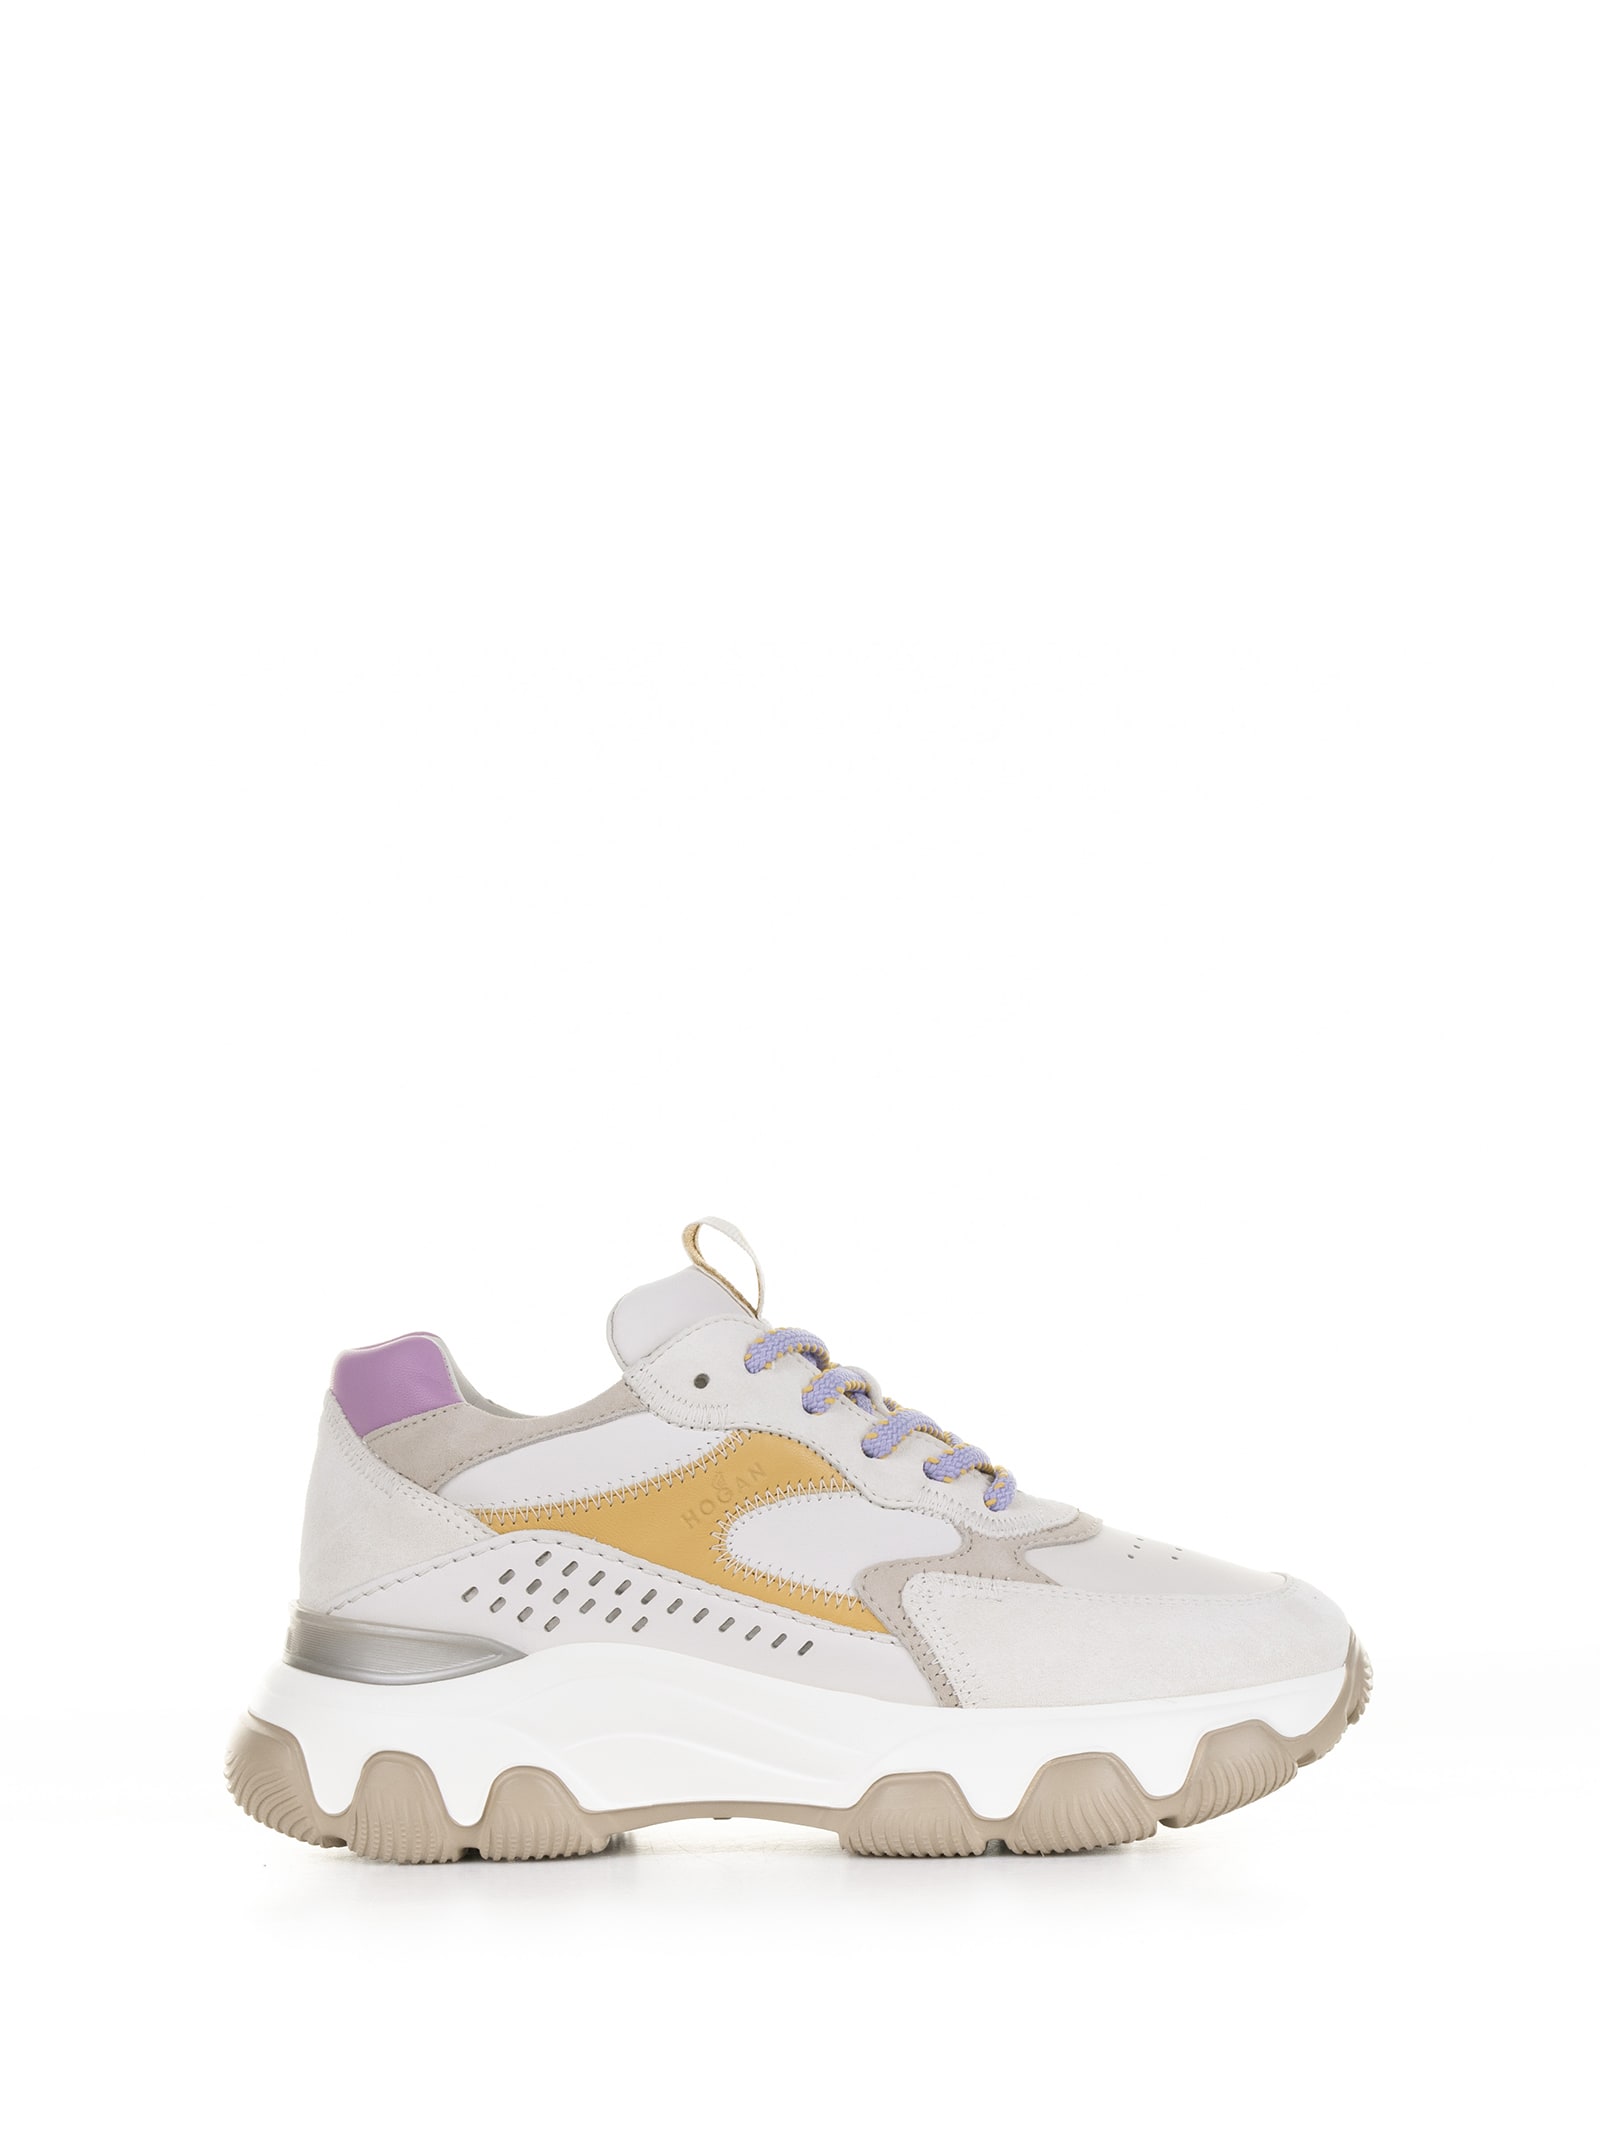 Hogan Multicolored Hyperactive Sneakers In White